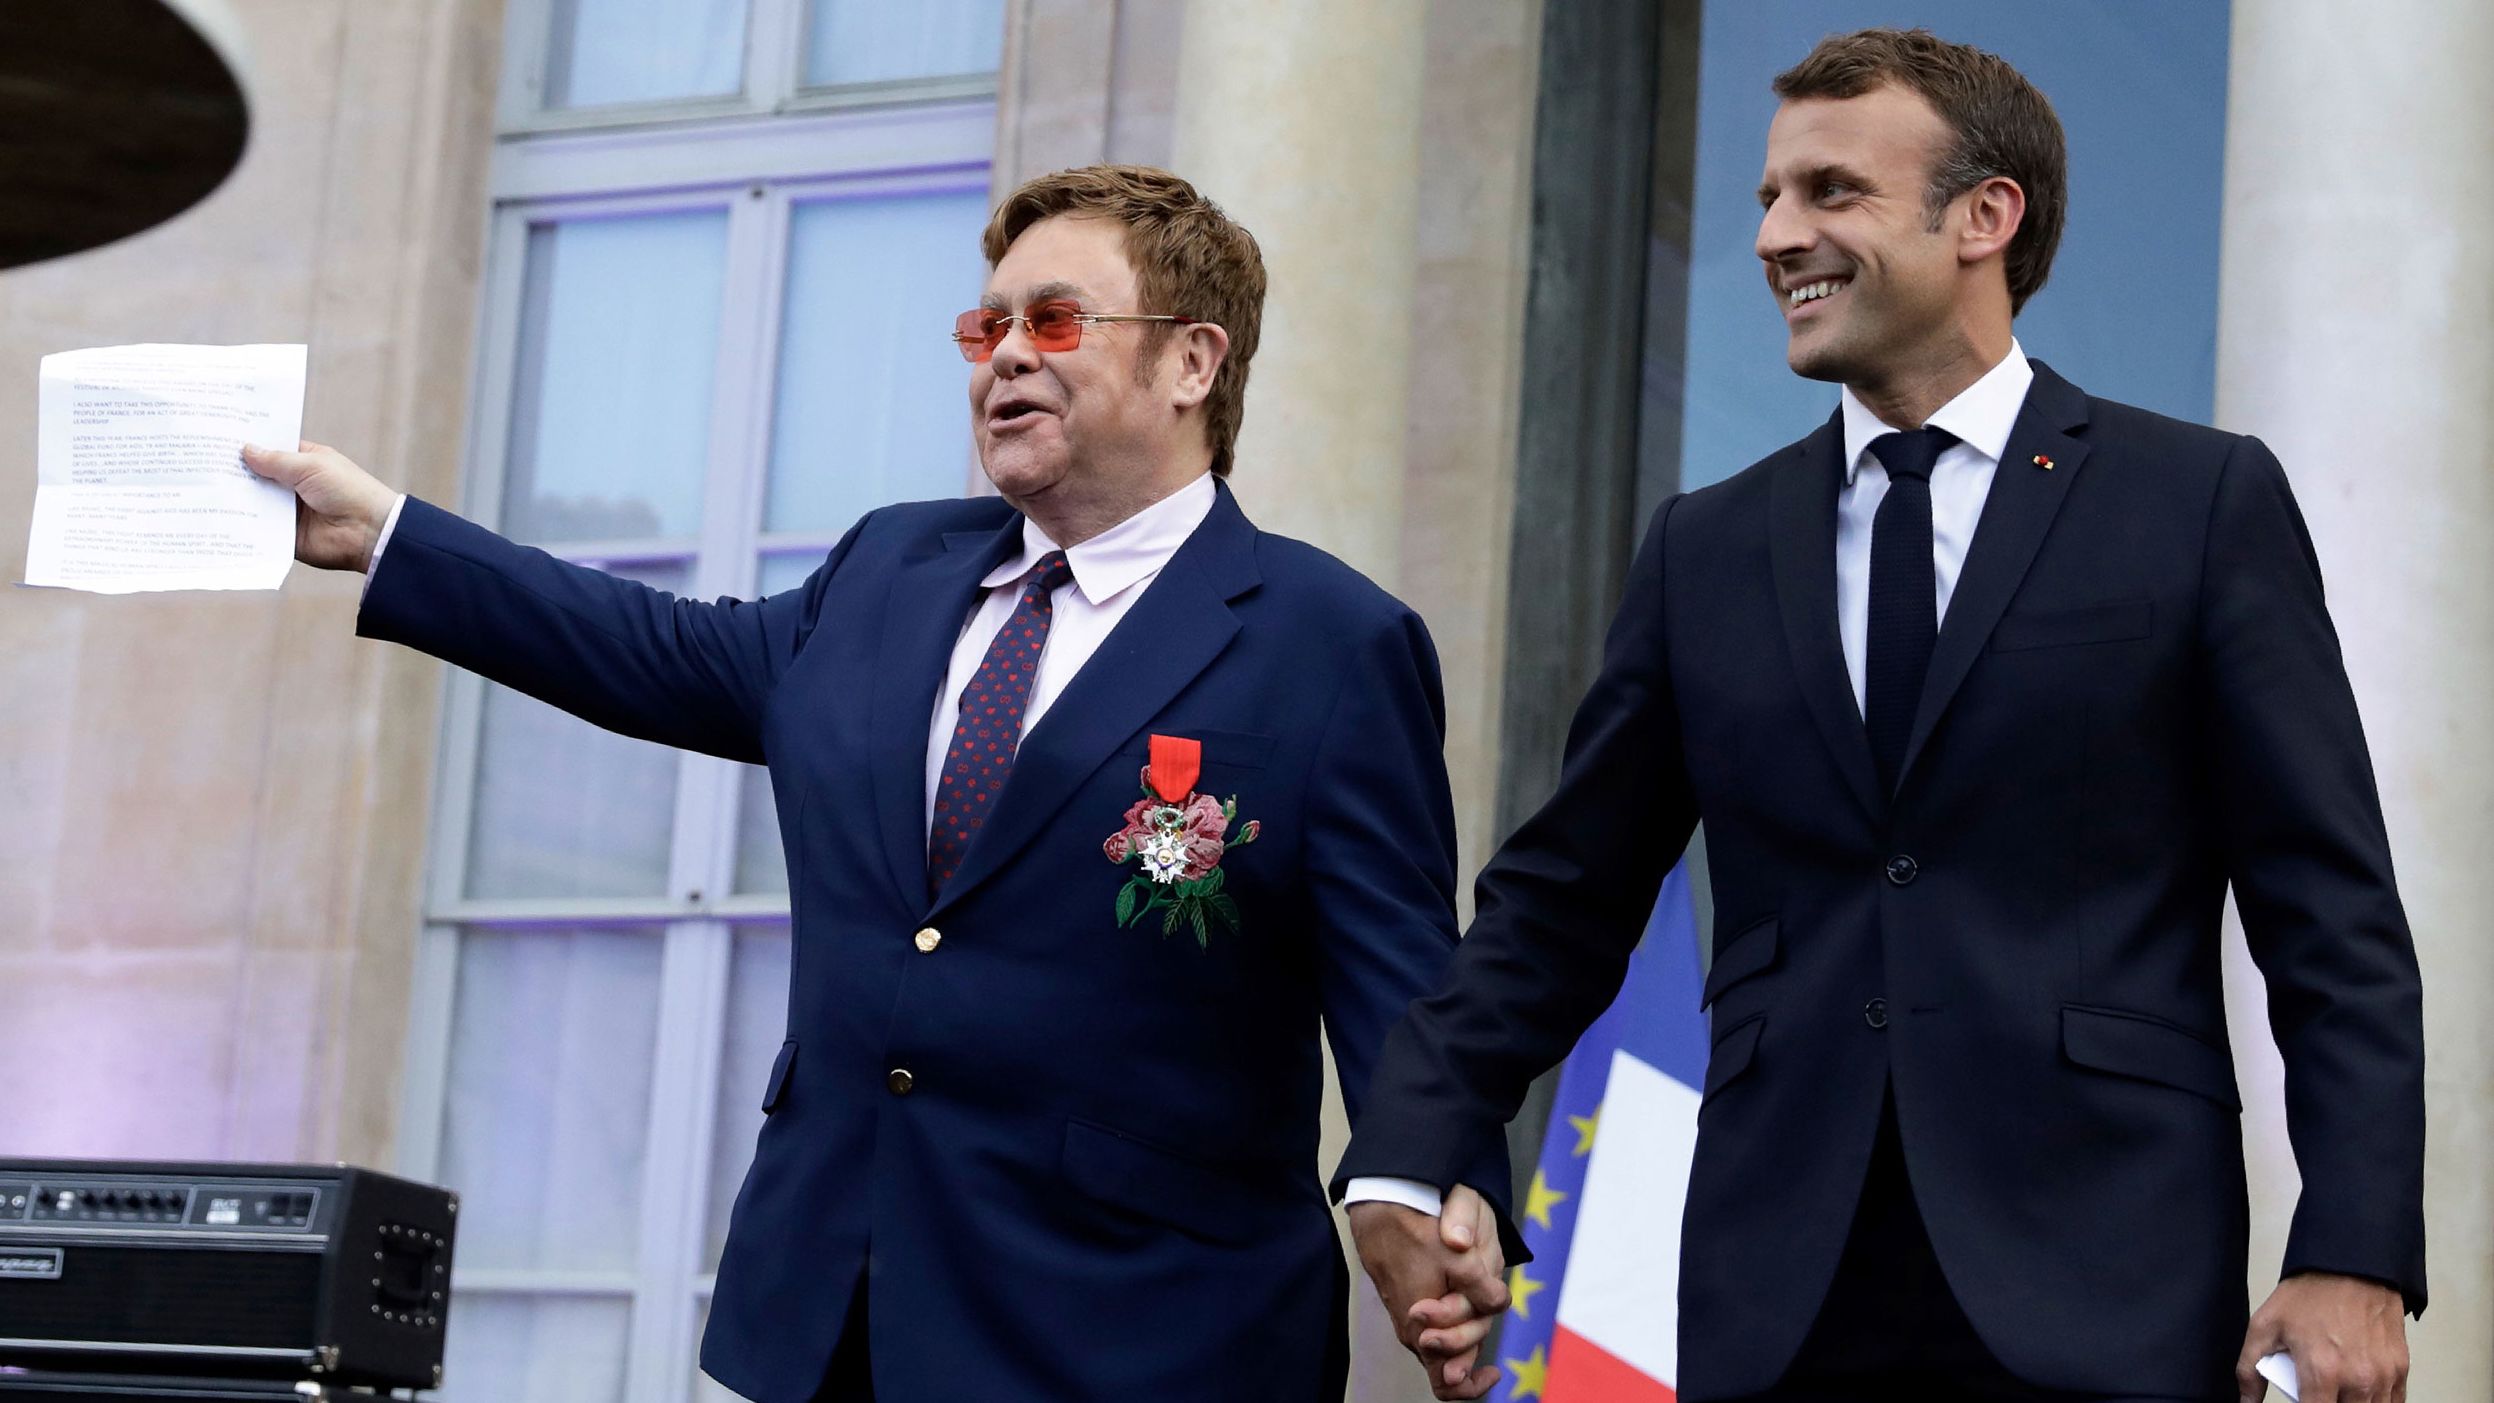 John and French President Emmanuel Macron arrive to speak to a crowd in Paris in June 2019. John was being honored with France's highest civilian award.